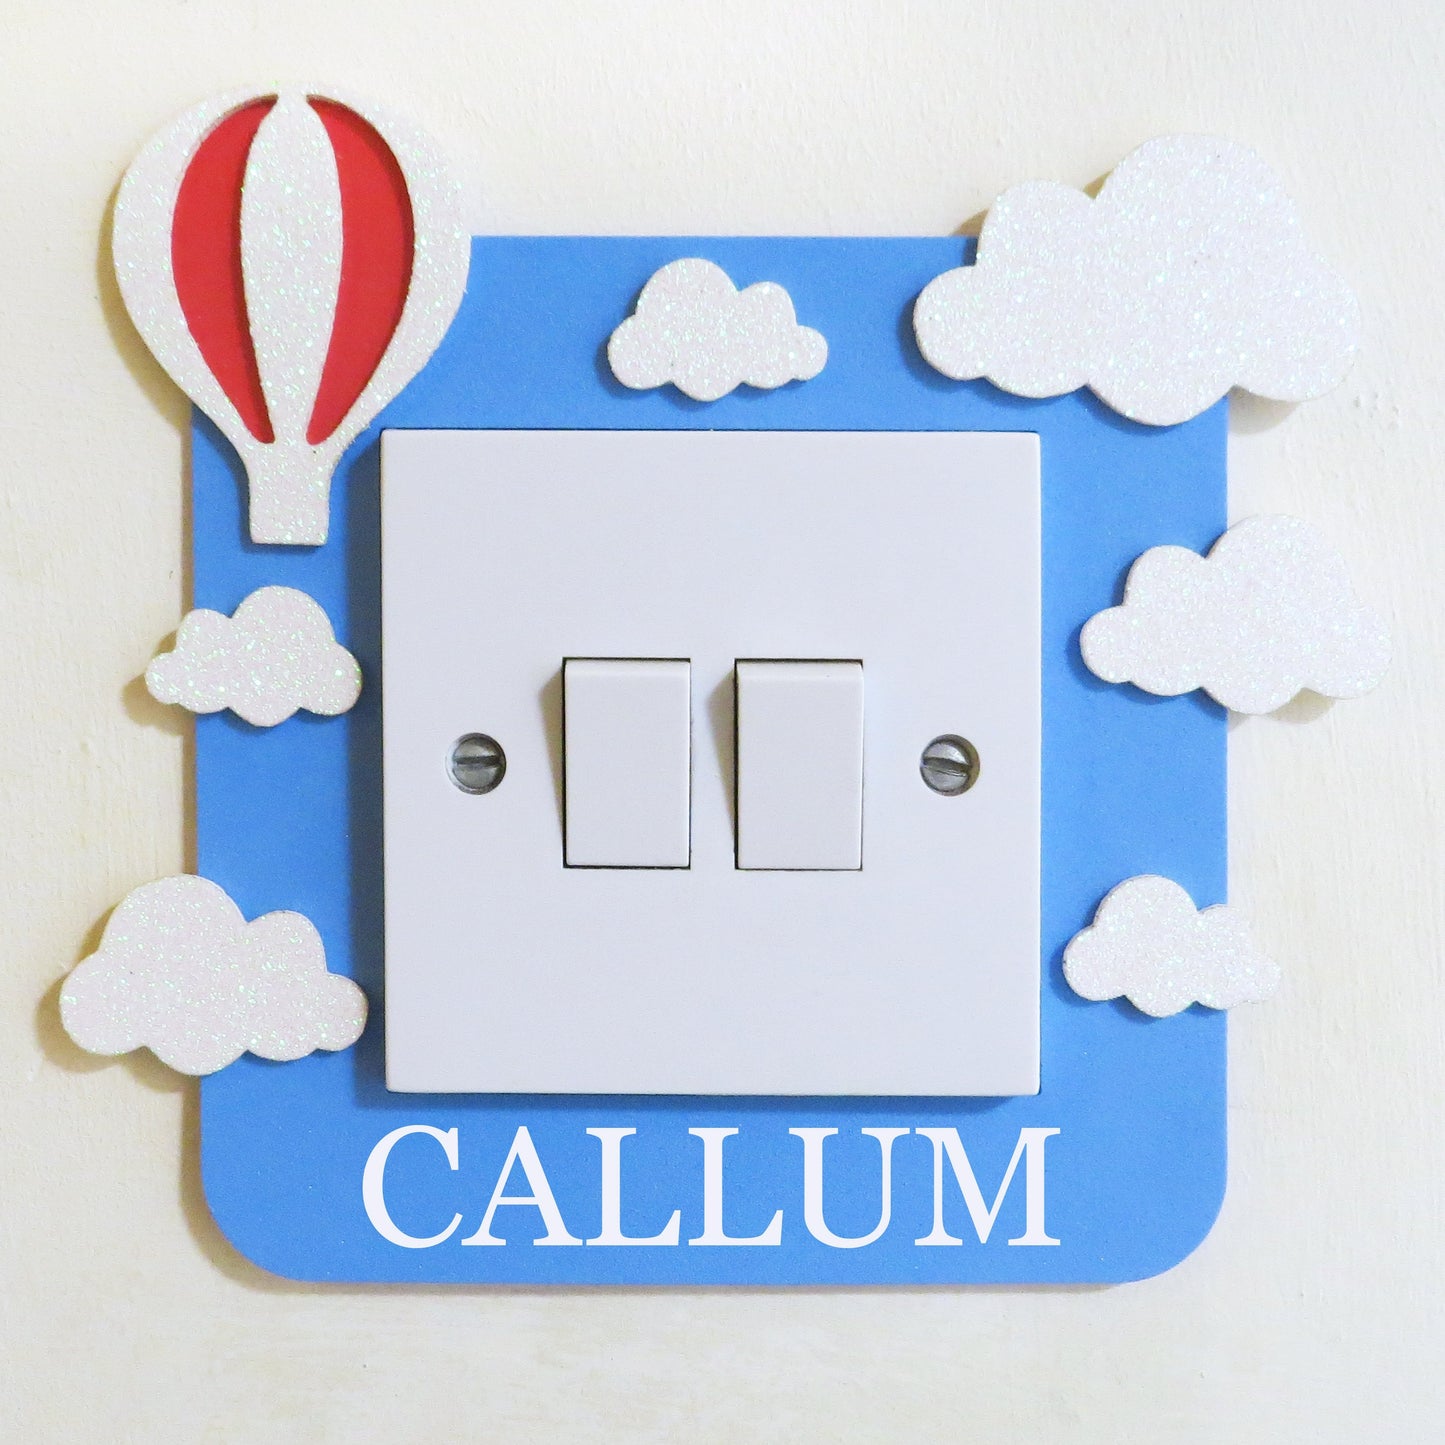 Blue foam light switch surround deigned with a hot air ballon, clouds and a custom name.